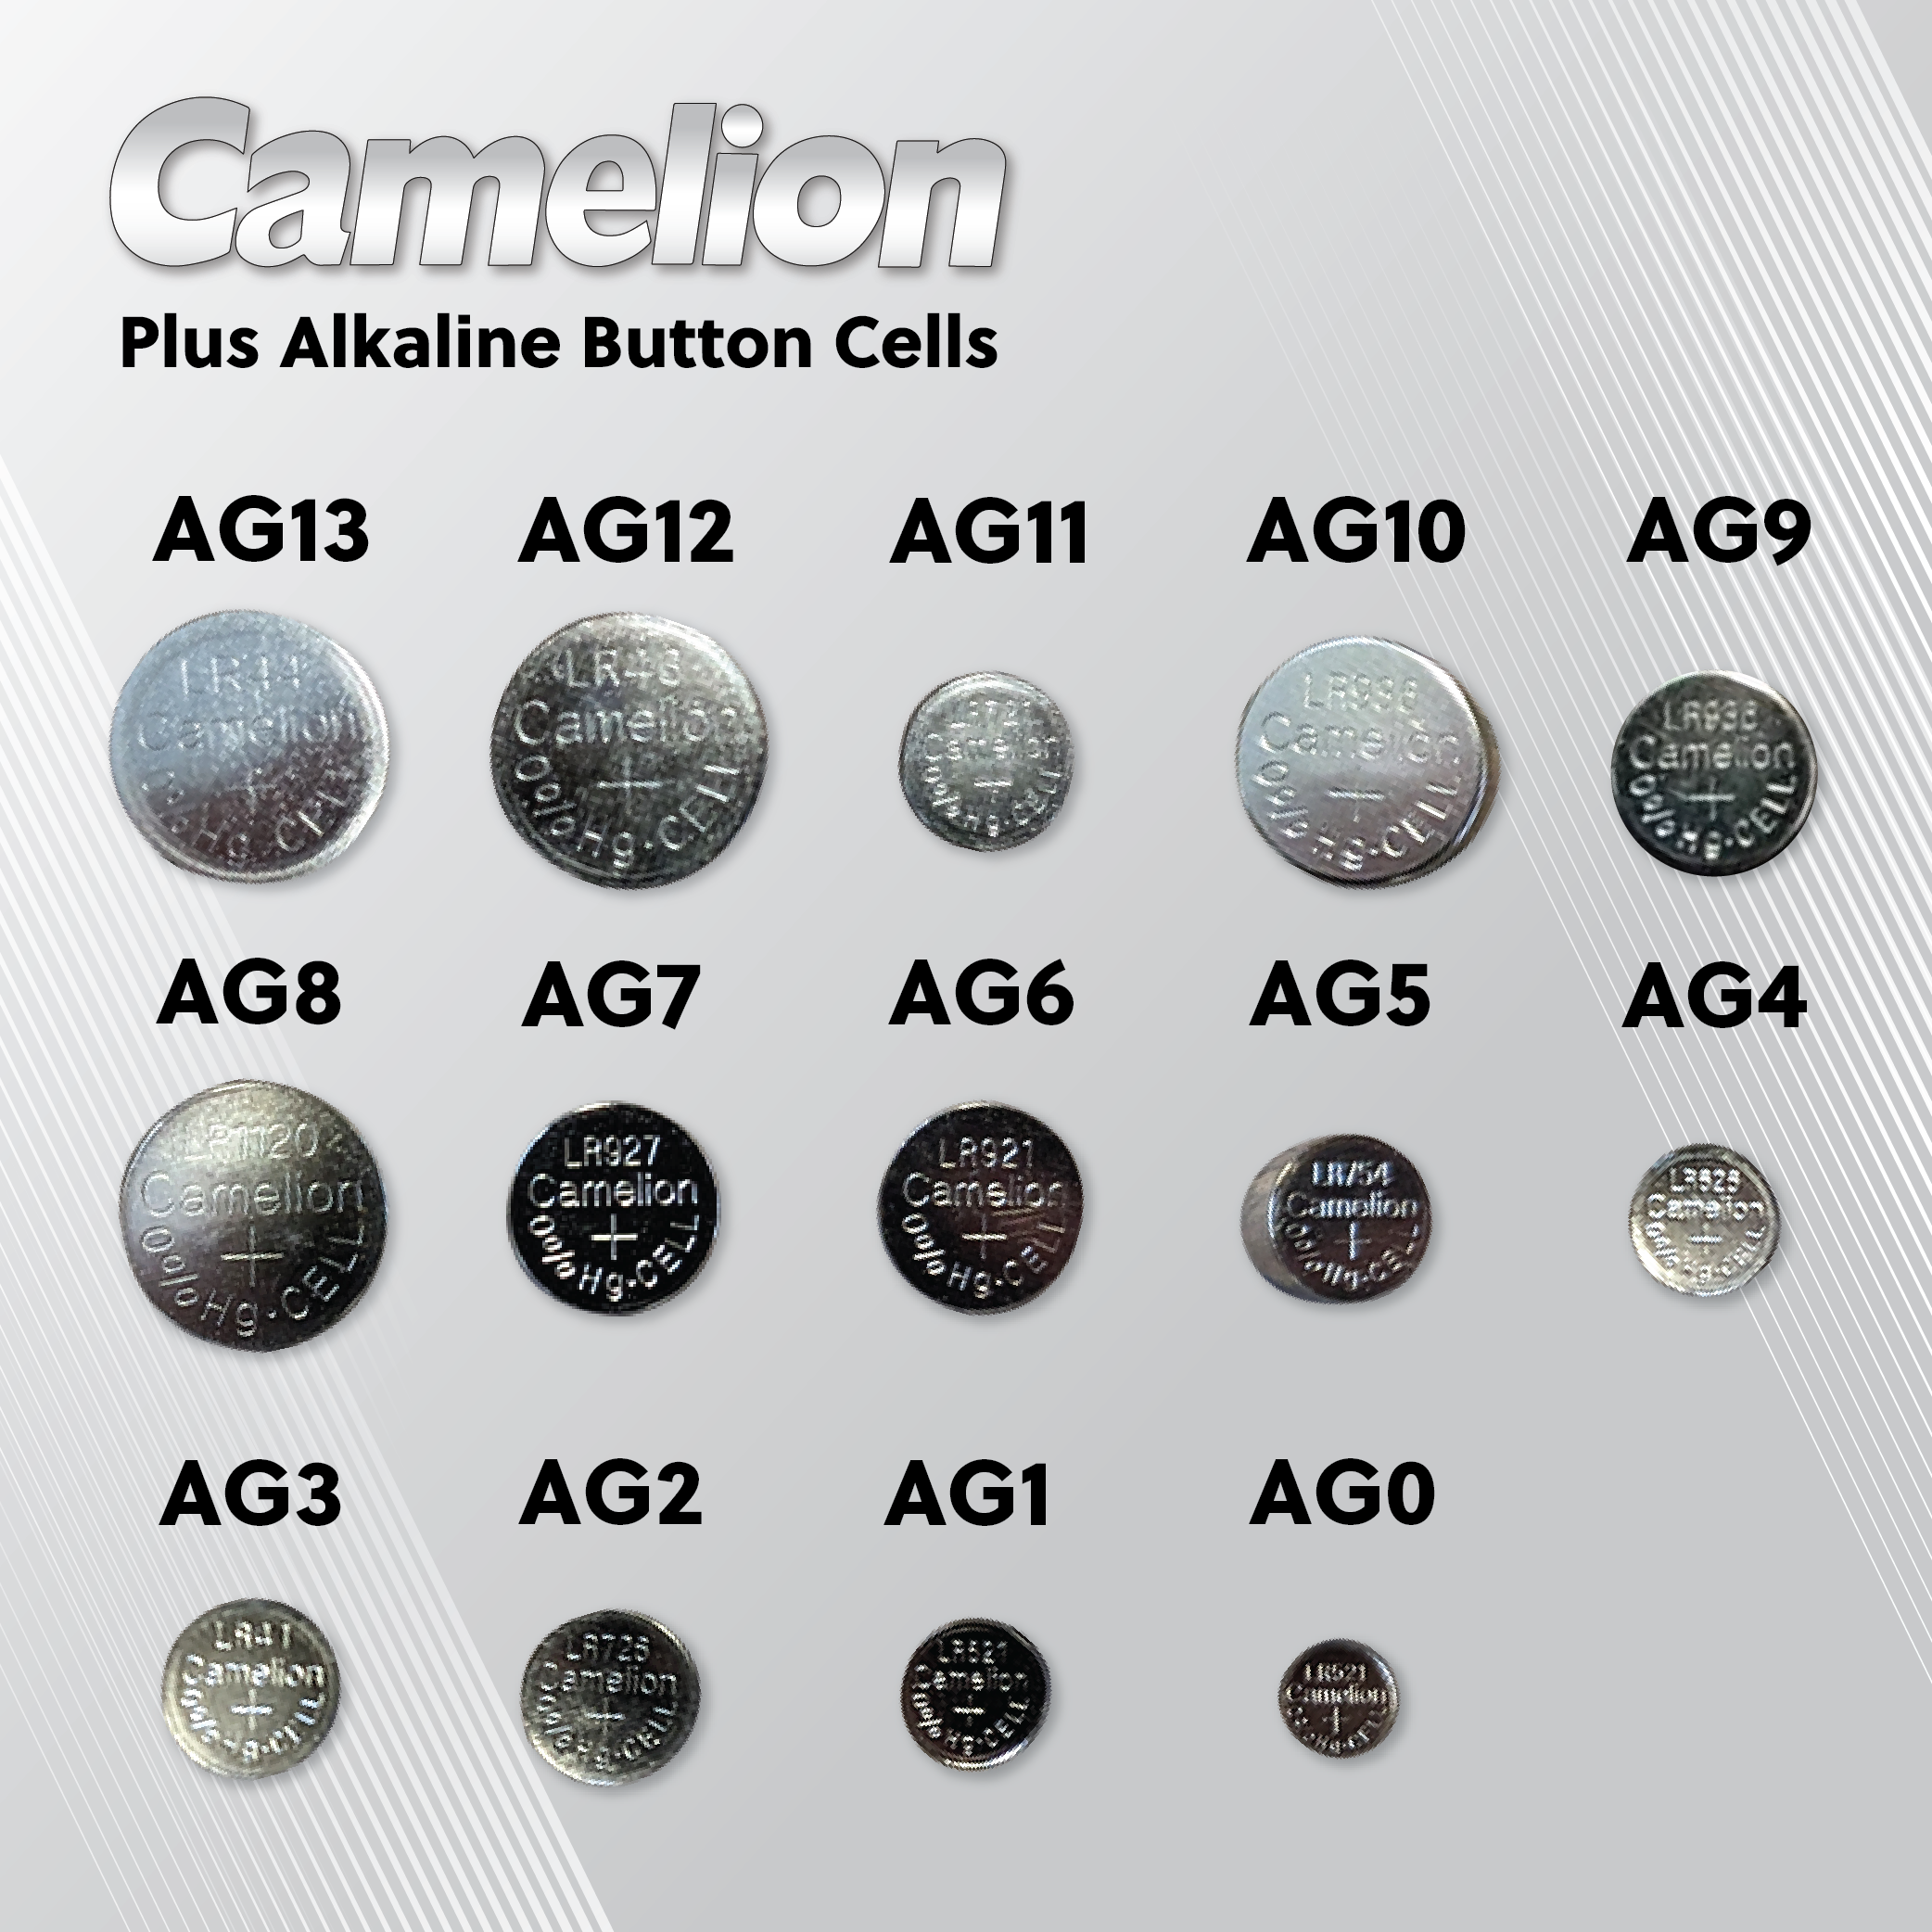 Camelion AG12 / 385 / LR43 1.5V Button Cell Battery (Two Packaging Options)